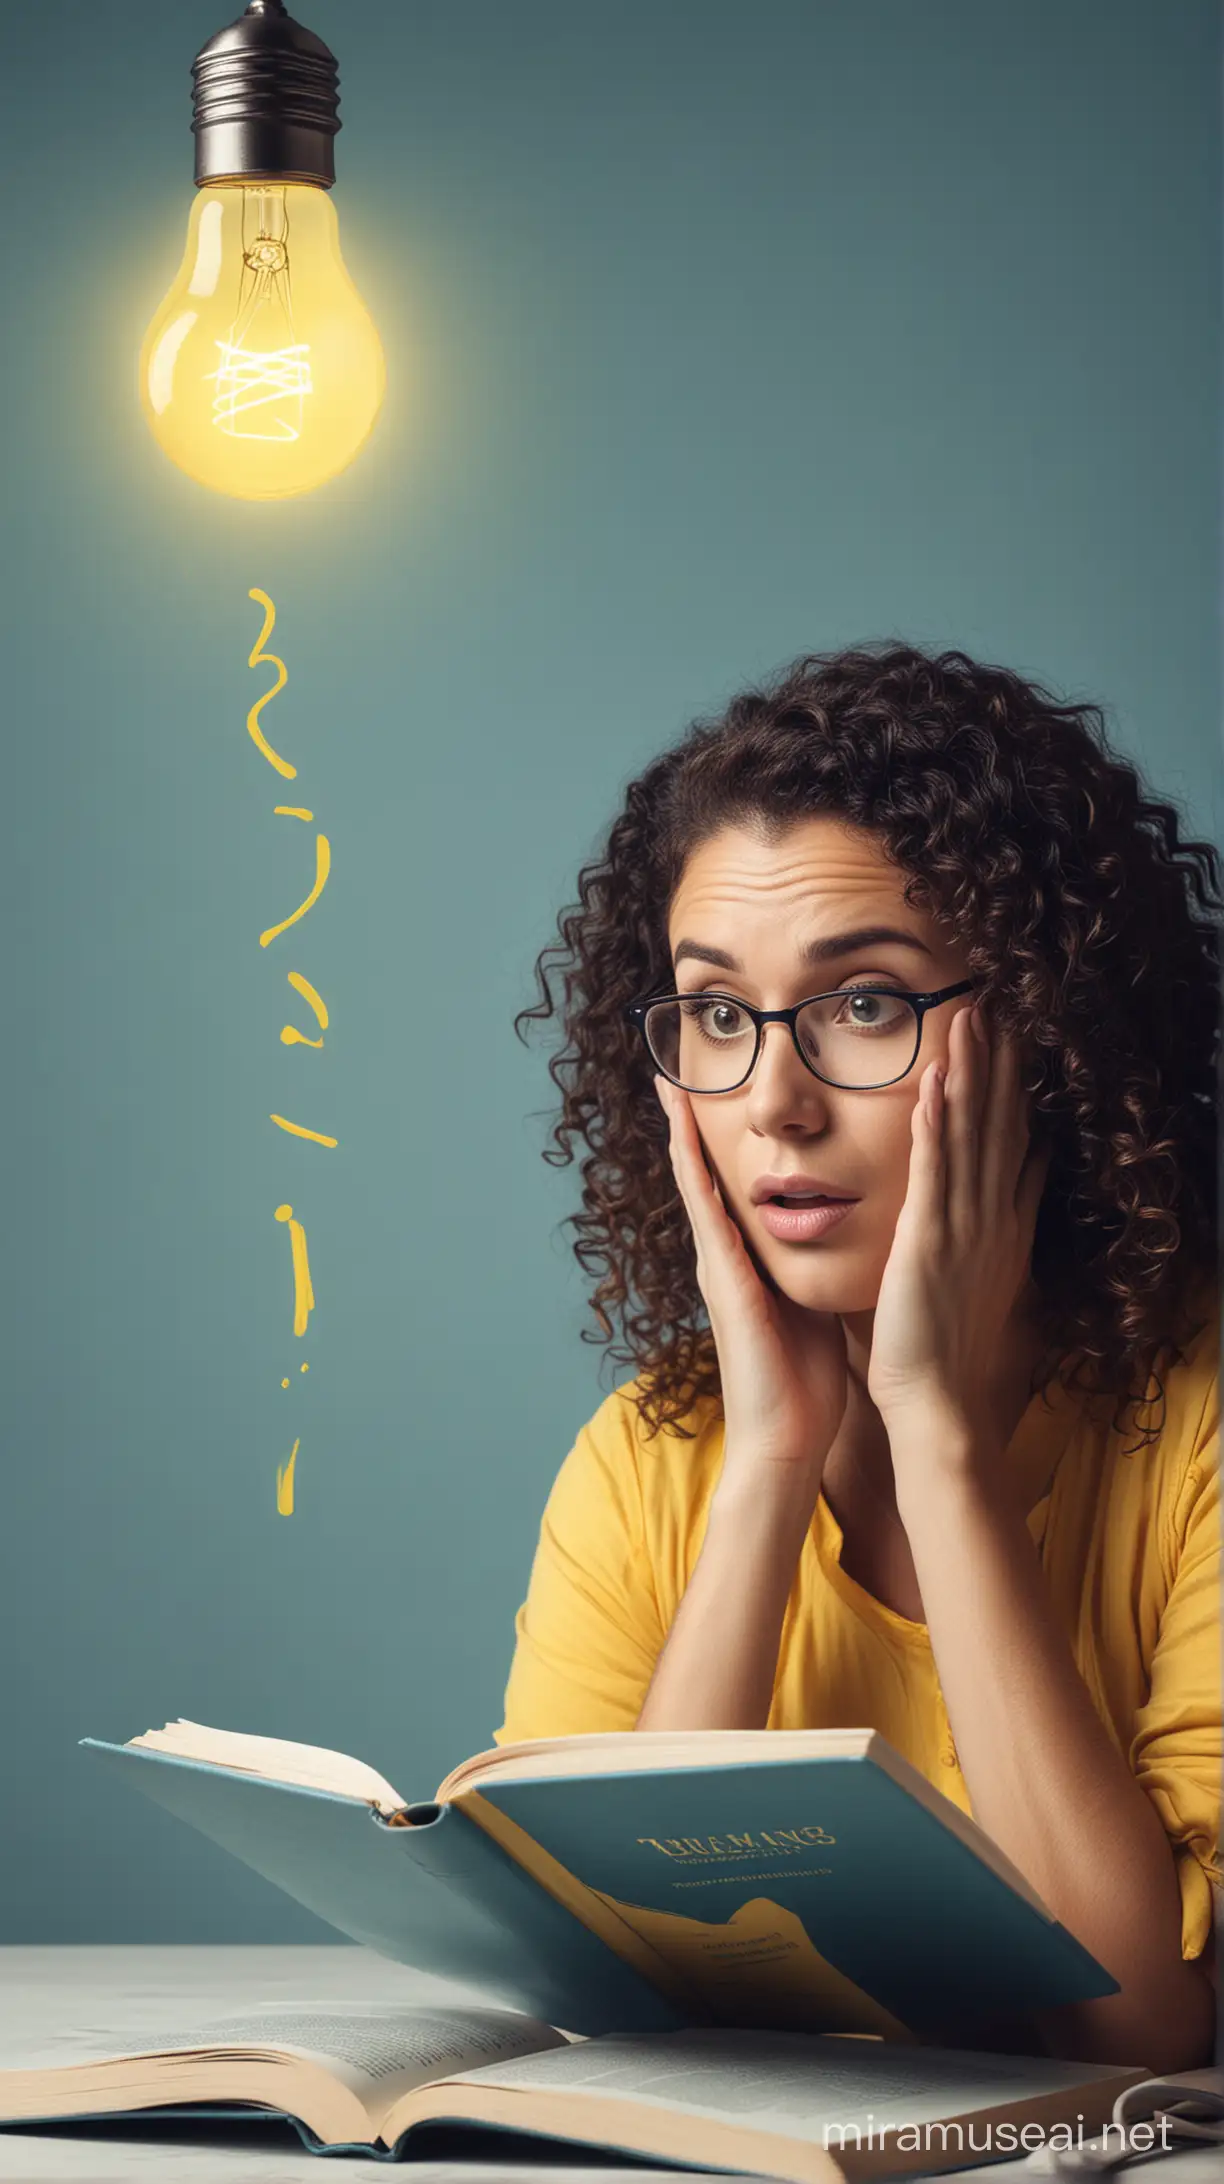 Create a professional design for an MLM training session that features a person looking confused while reading a book, with a lightbulb turning on above their head. Use blue and yellow colors to convey a sense of clarity and optimism.